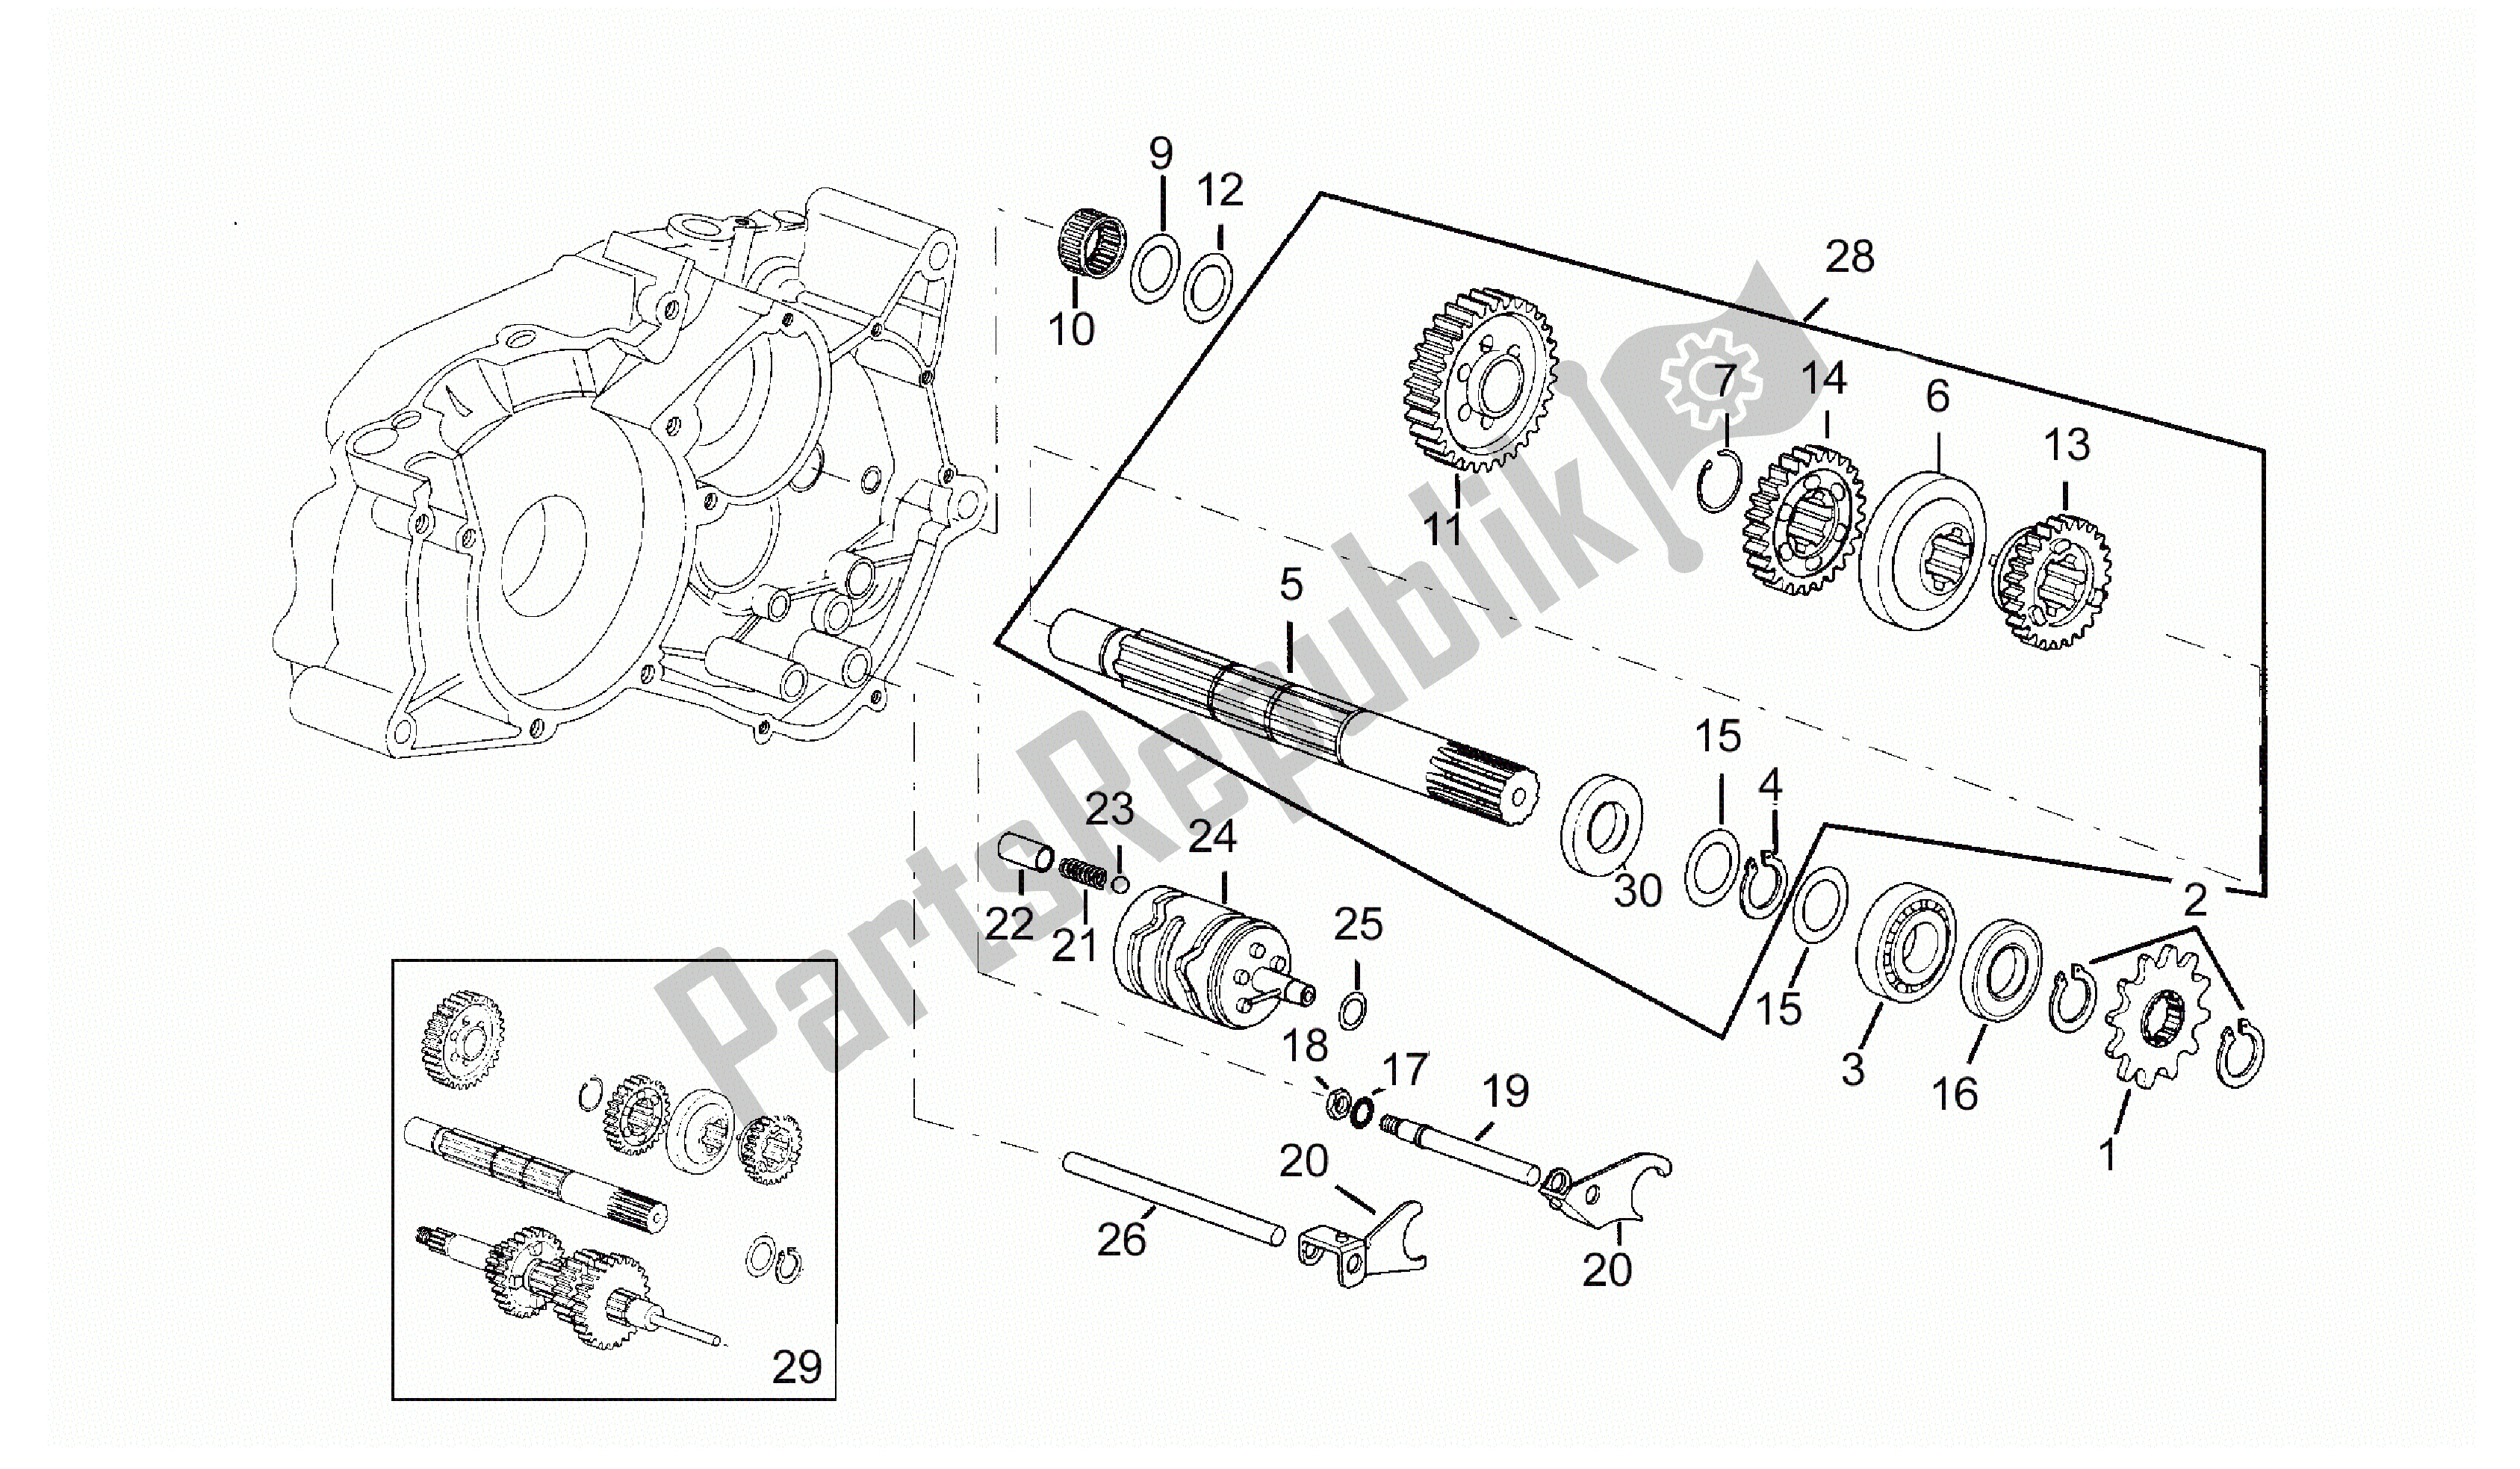 All parts for the Driven Shaft of the Aprilia RX 50 1995 - 2000